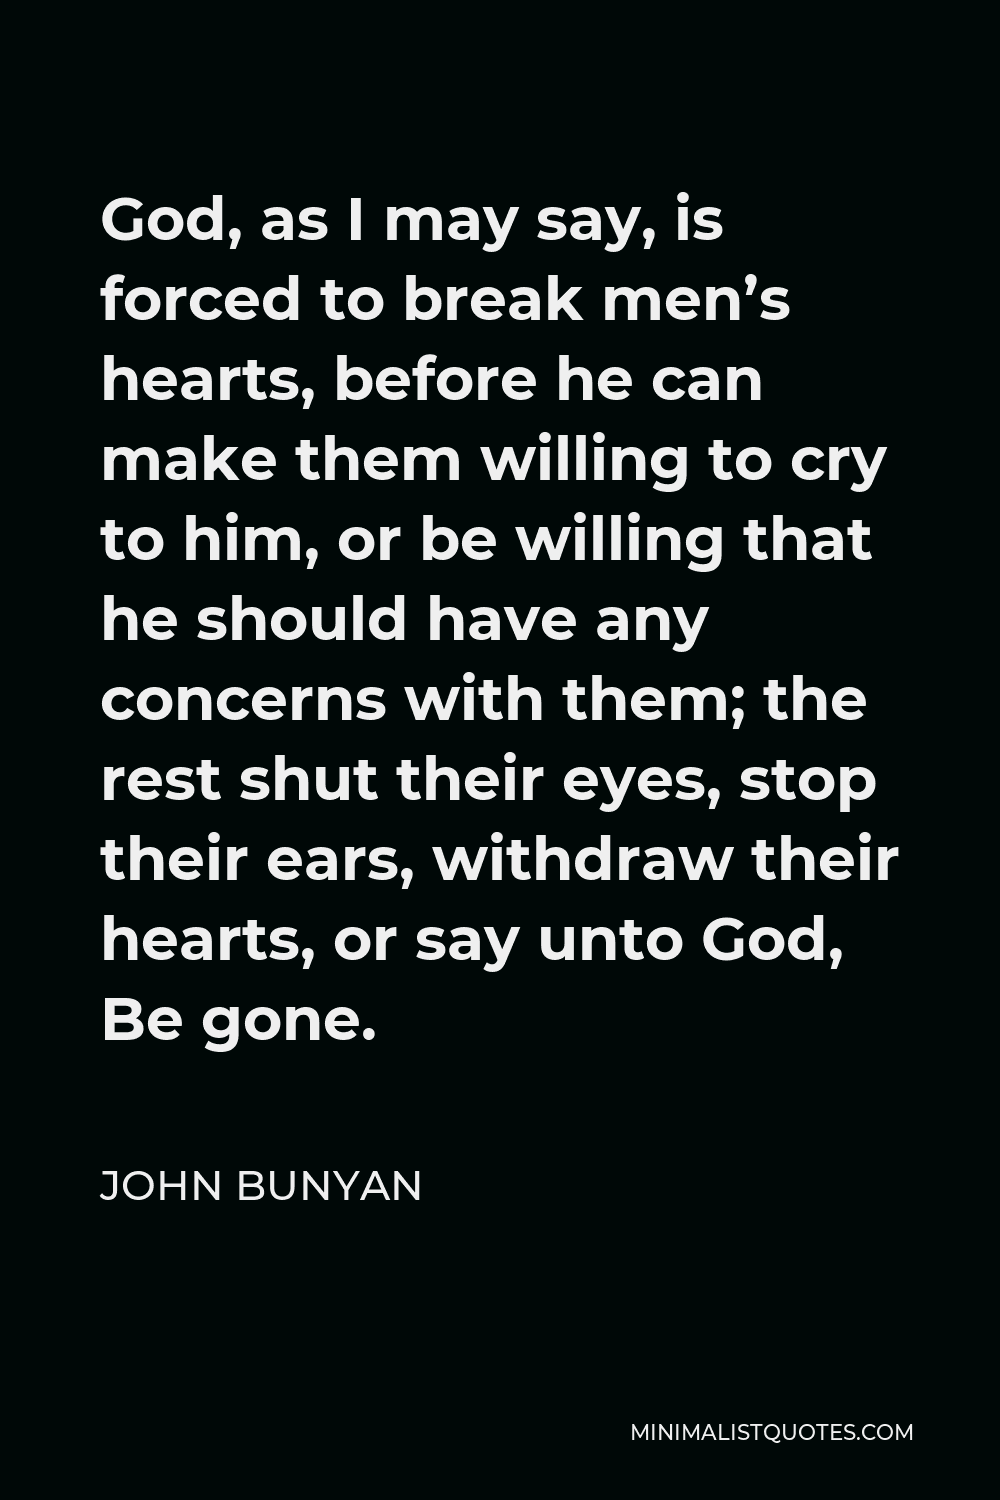 John Bunyan Quote - God, as I may say, is forced to break men’s hearts, before he can make them willing to cry to him, or be willing that he should have any concerns with them; the rest shut their eyes, stop their ears, withdraw their hearts, or say unto God, Be gone.